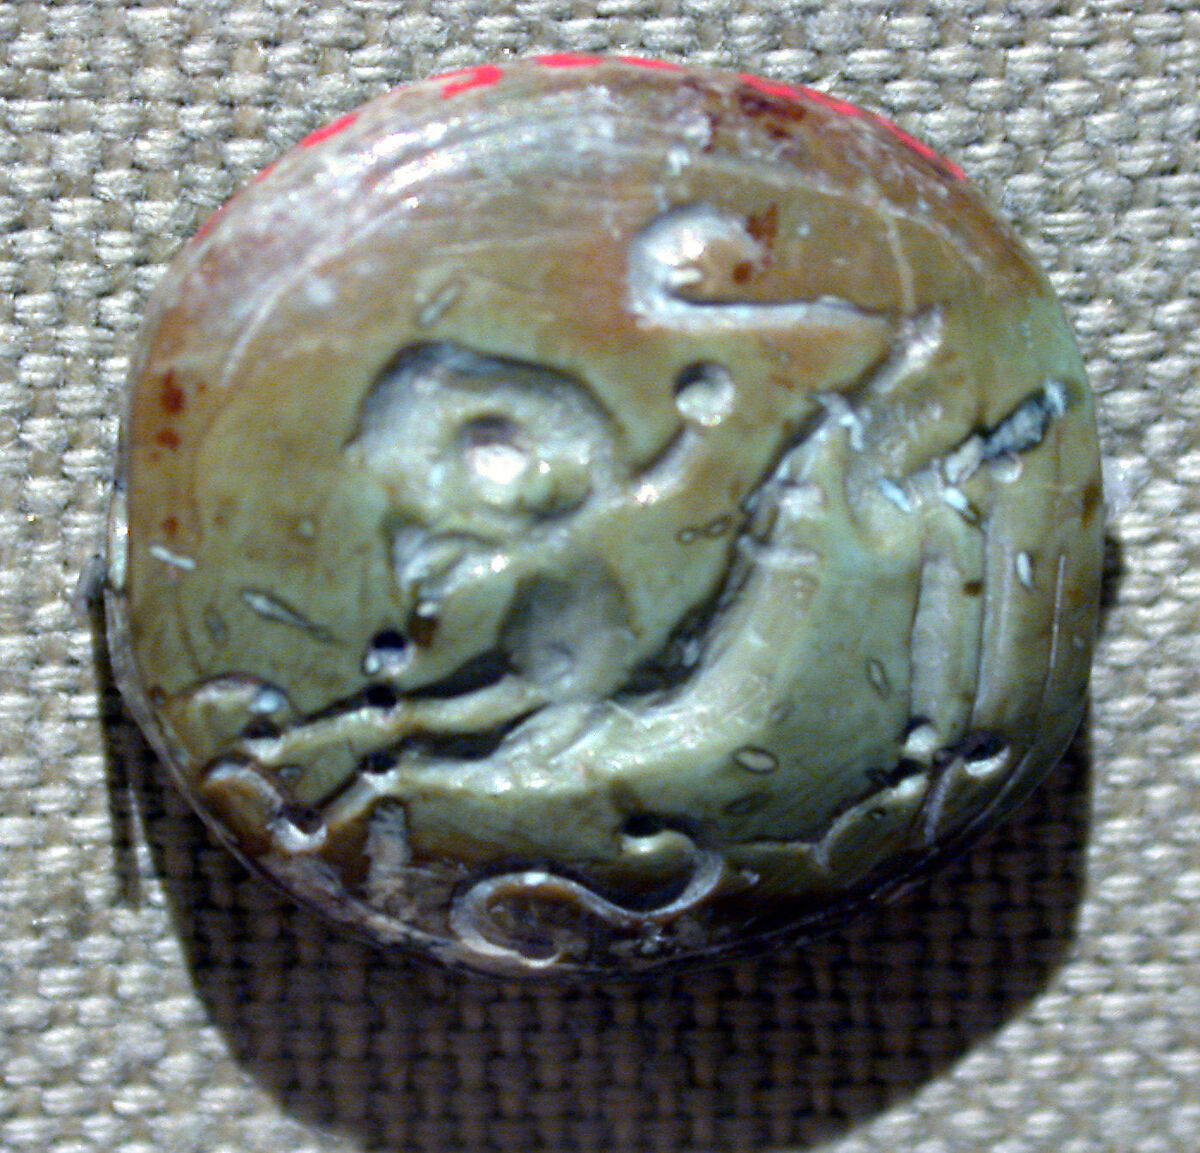 Stamp seal: lion and horned animal, Hematite, Cypriot 